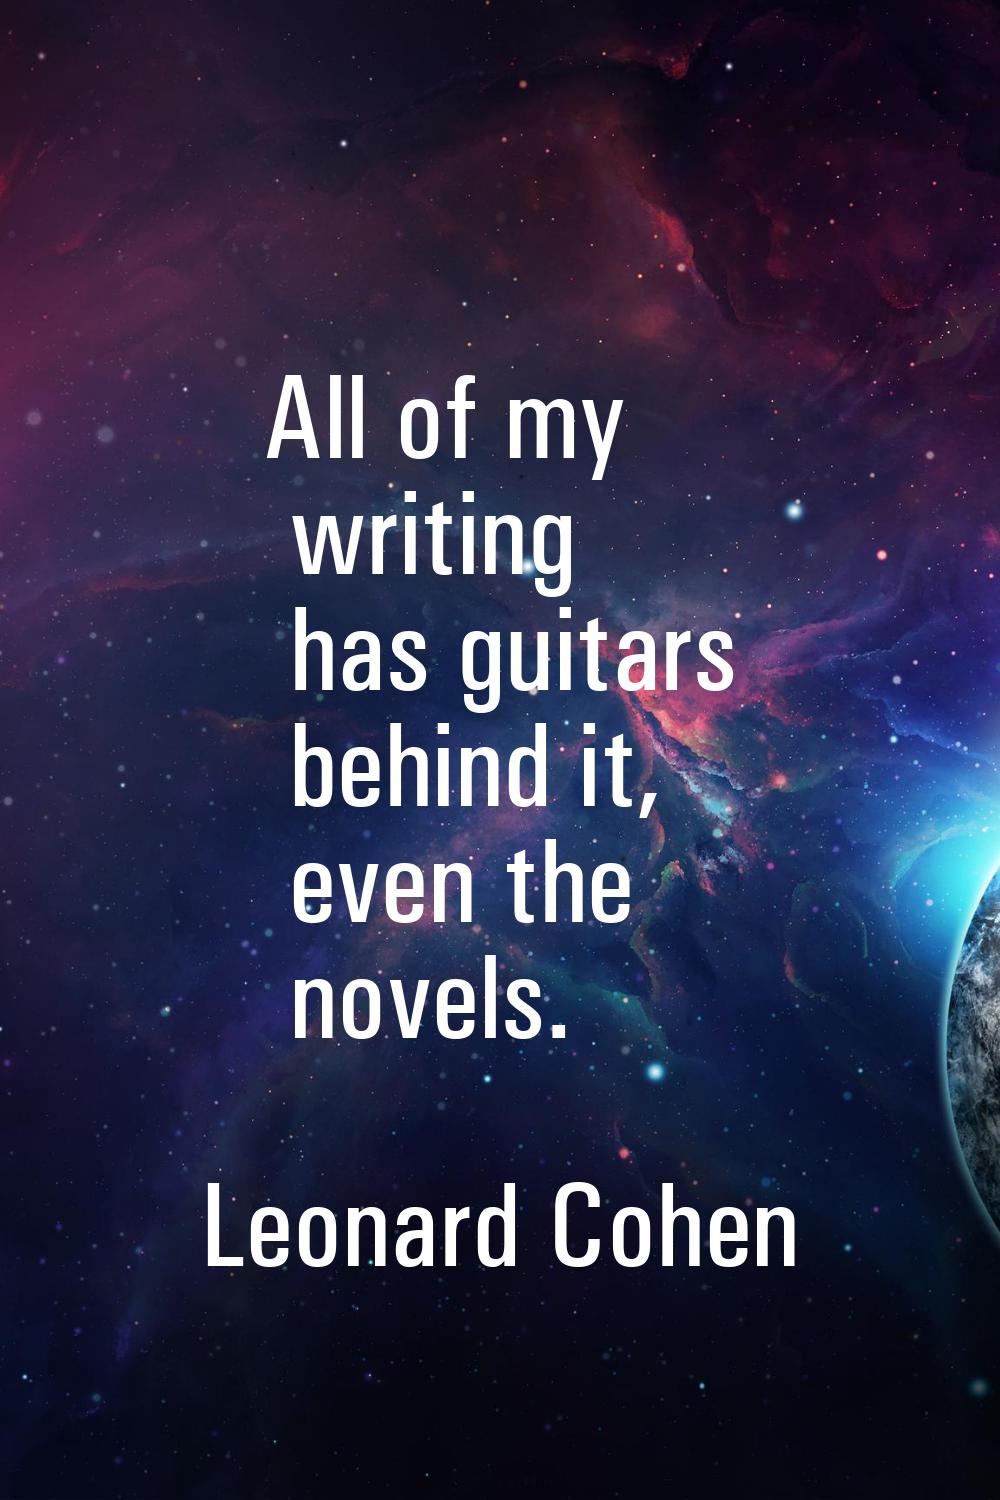 All of my writing has guitars behind it, even the novels.